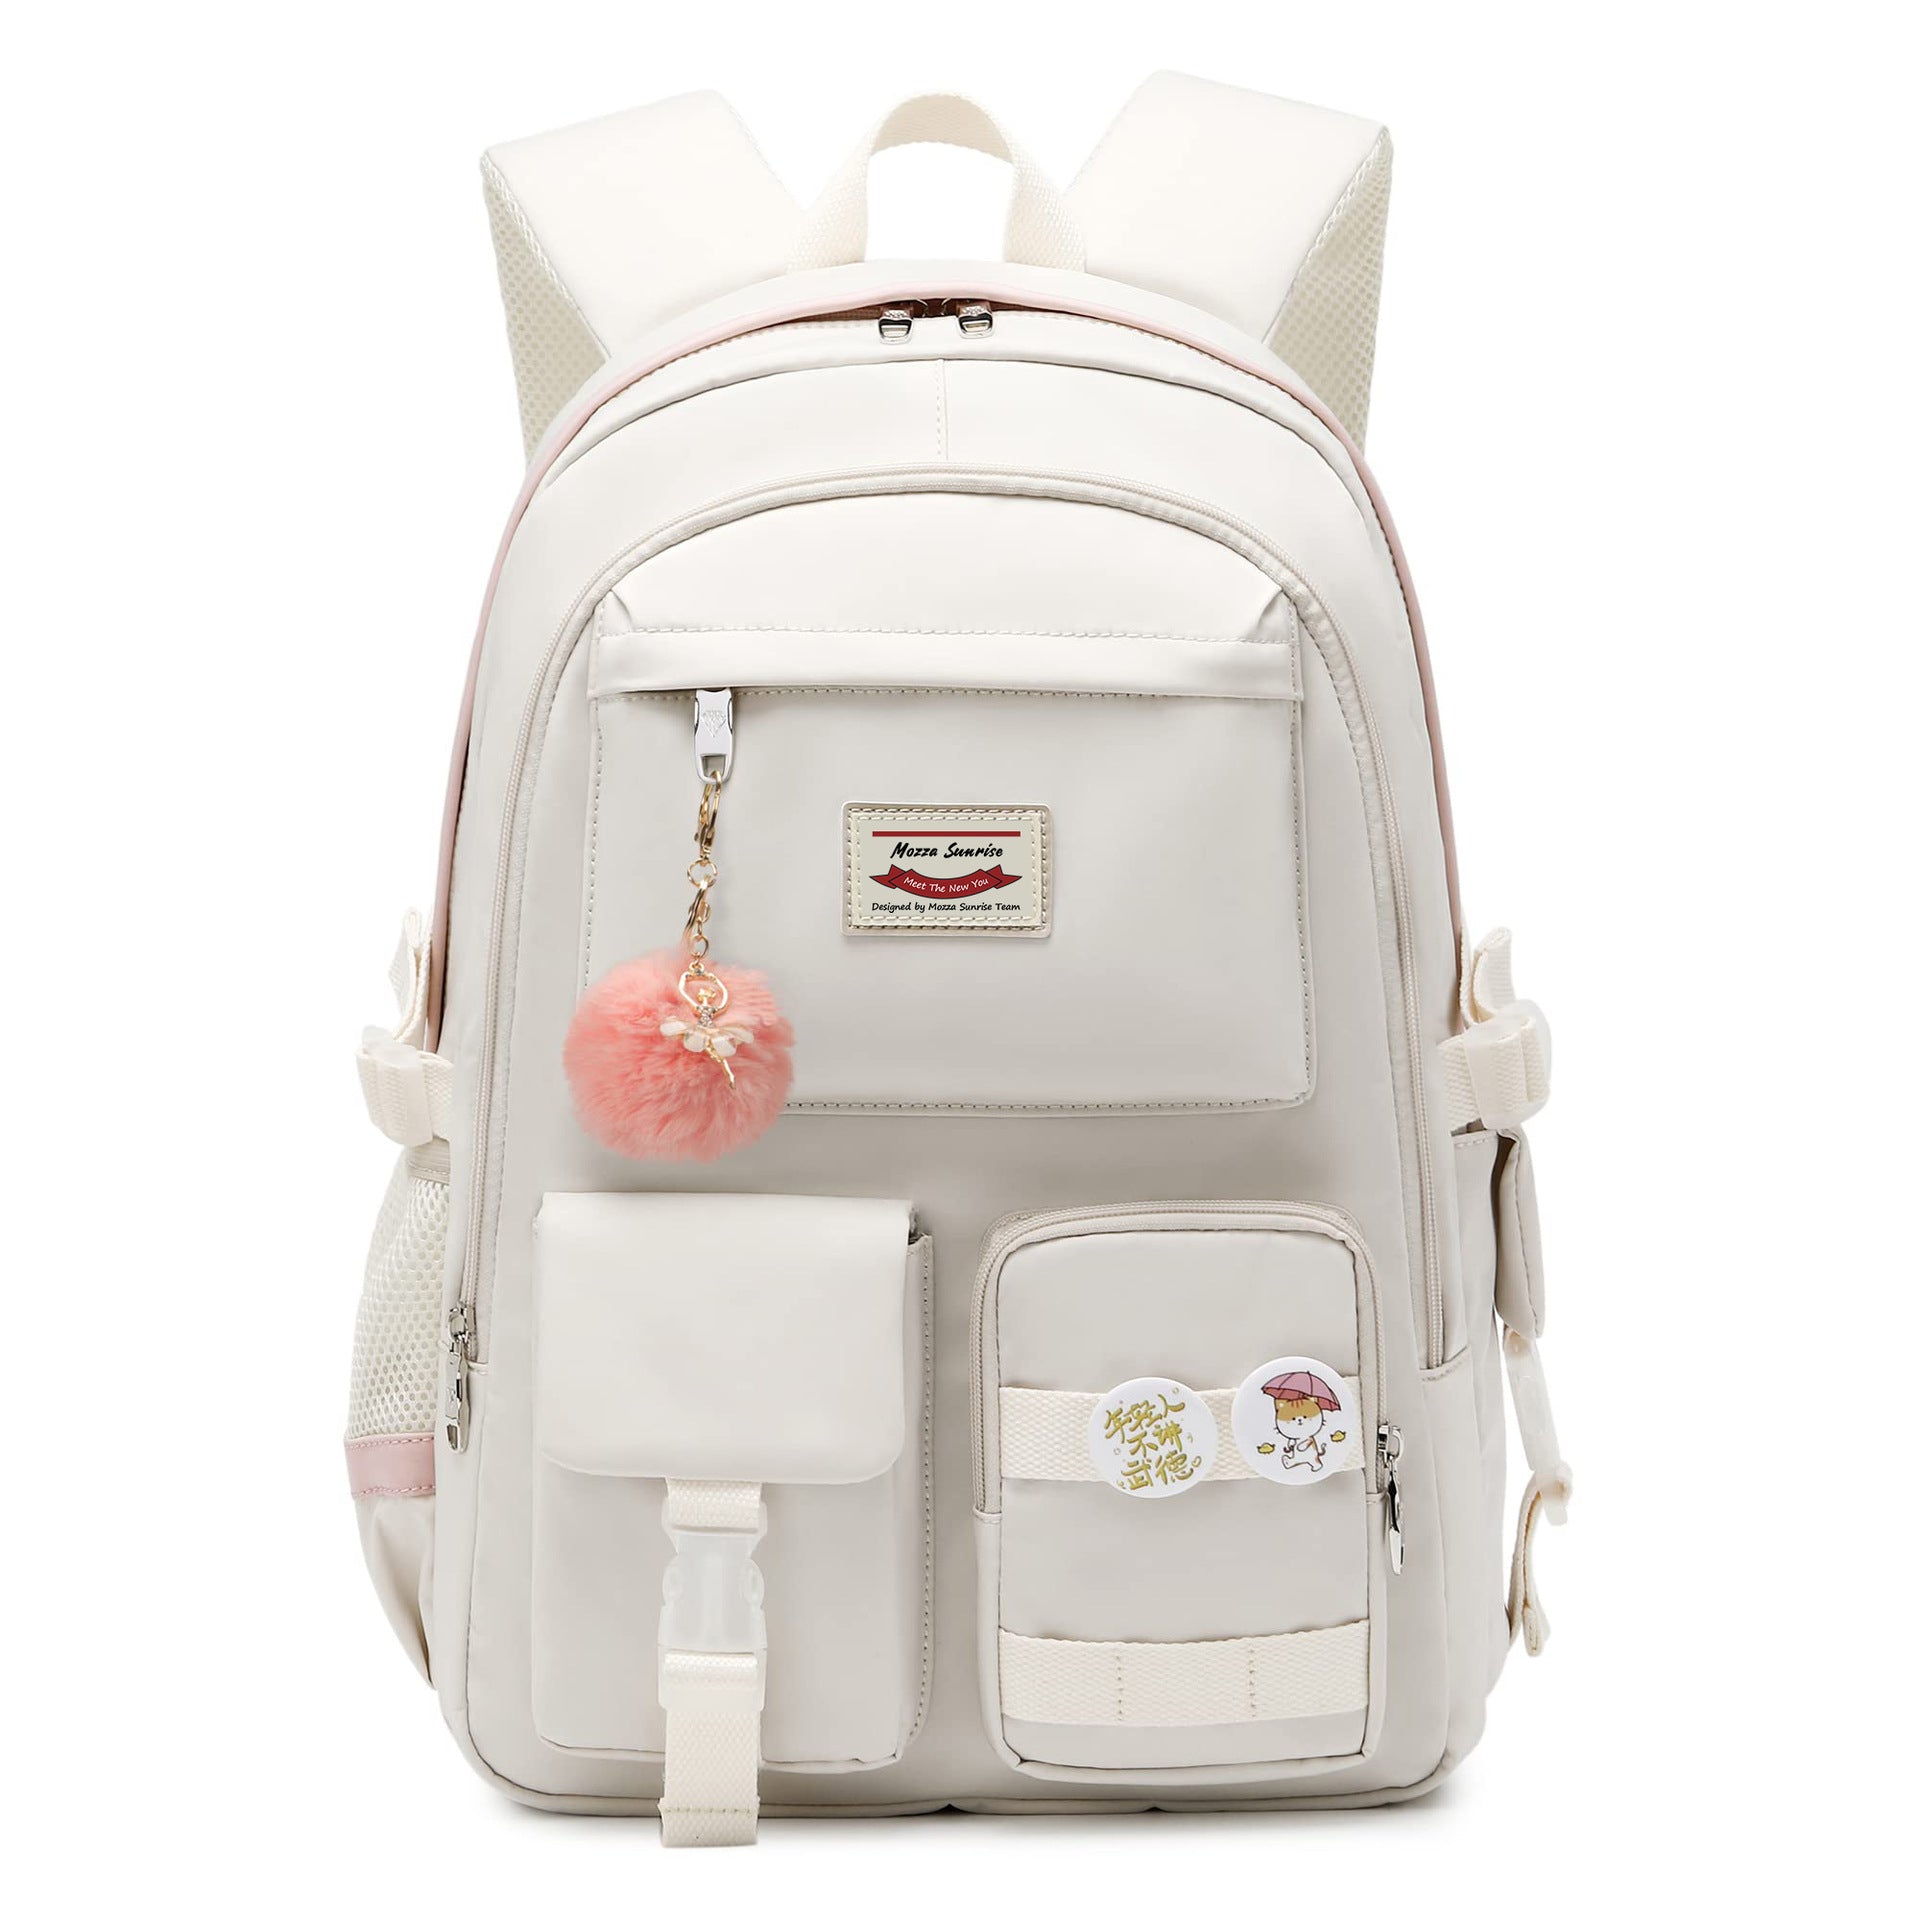 Student Schoolbag Large Capacity Computer Backpack